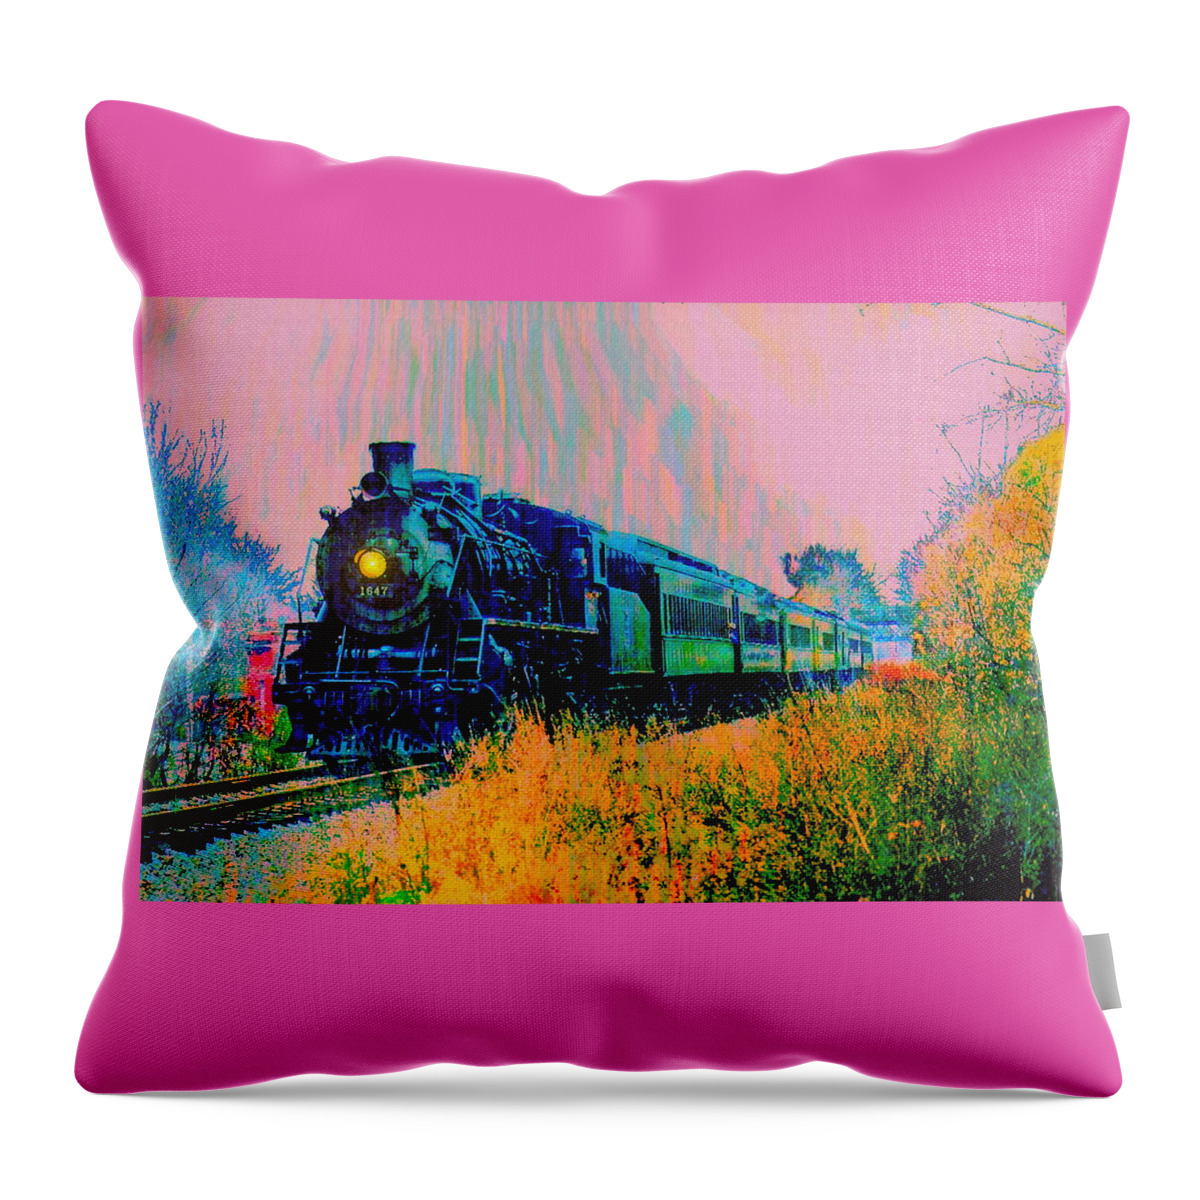 Providence & Worcester Railroad Throw Pillow featuring the digital art Providence Worcester Train 1647 by Cliff Wilson